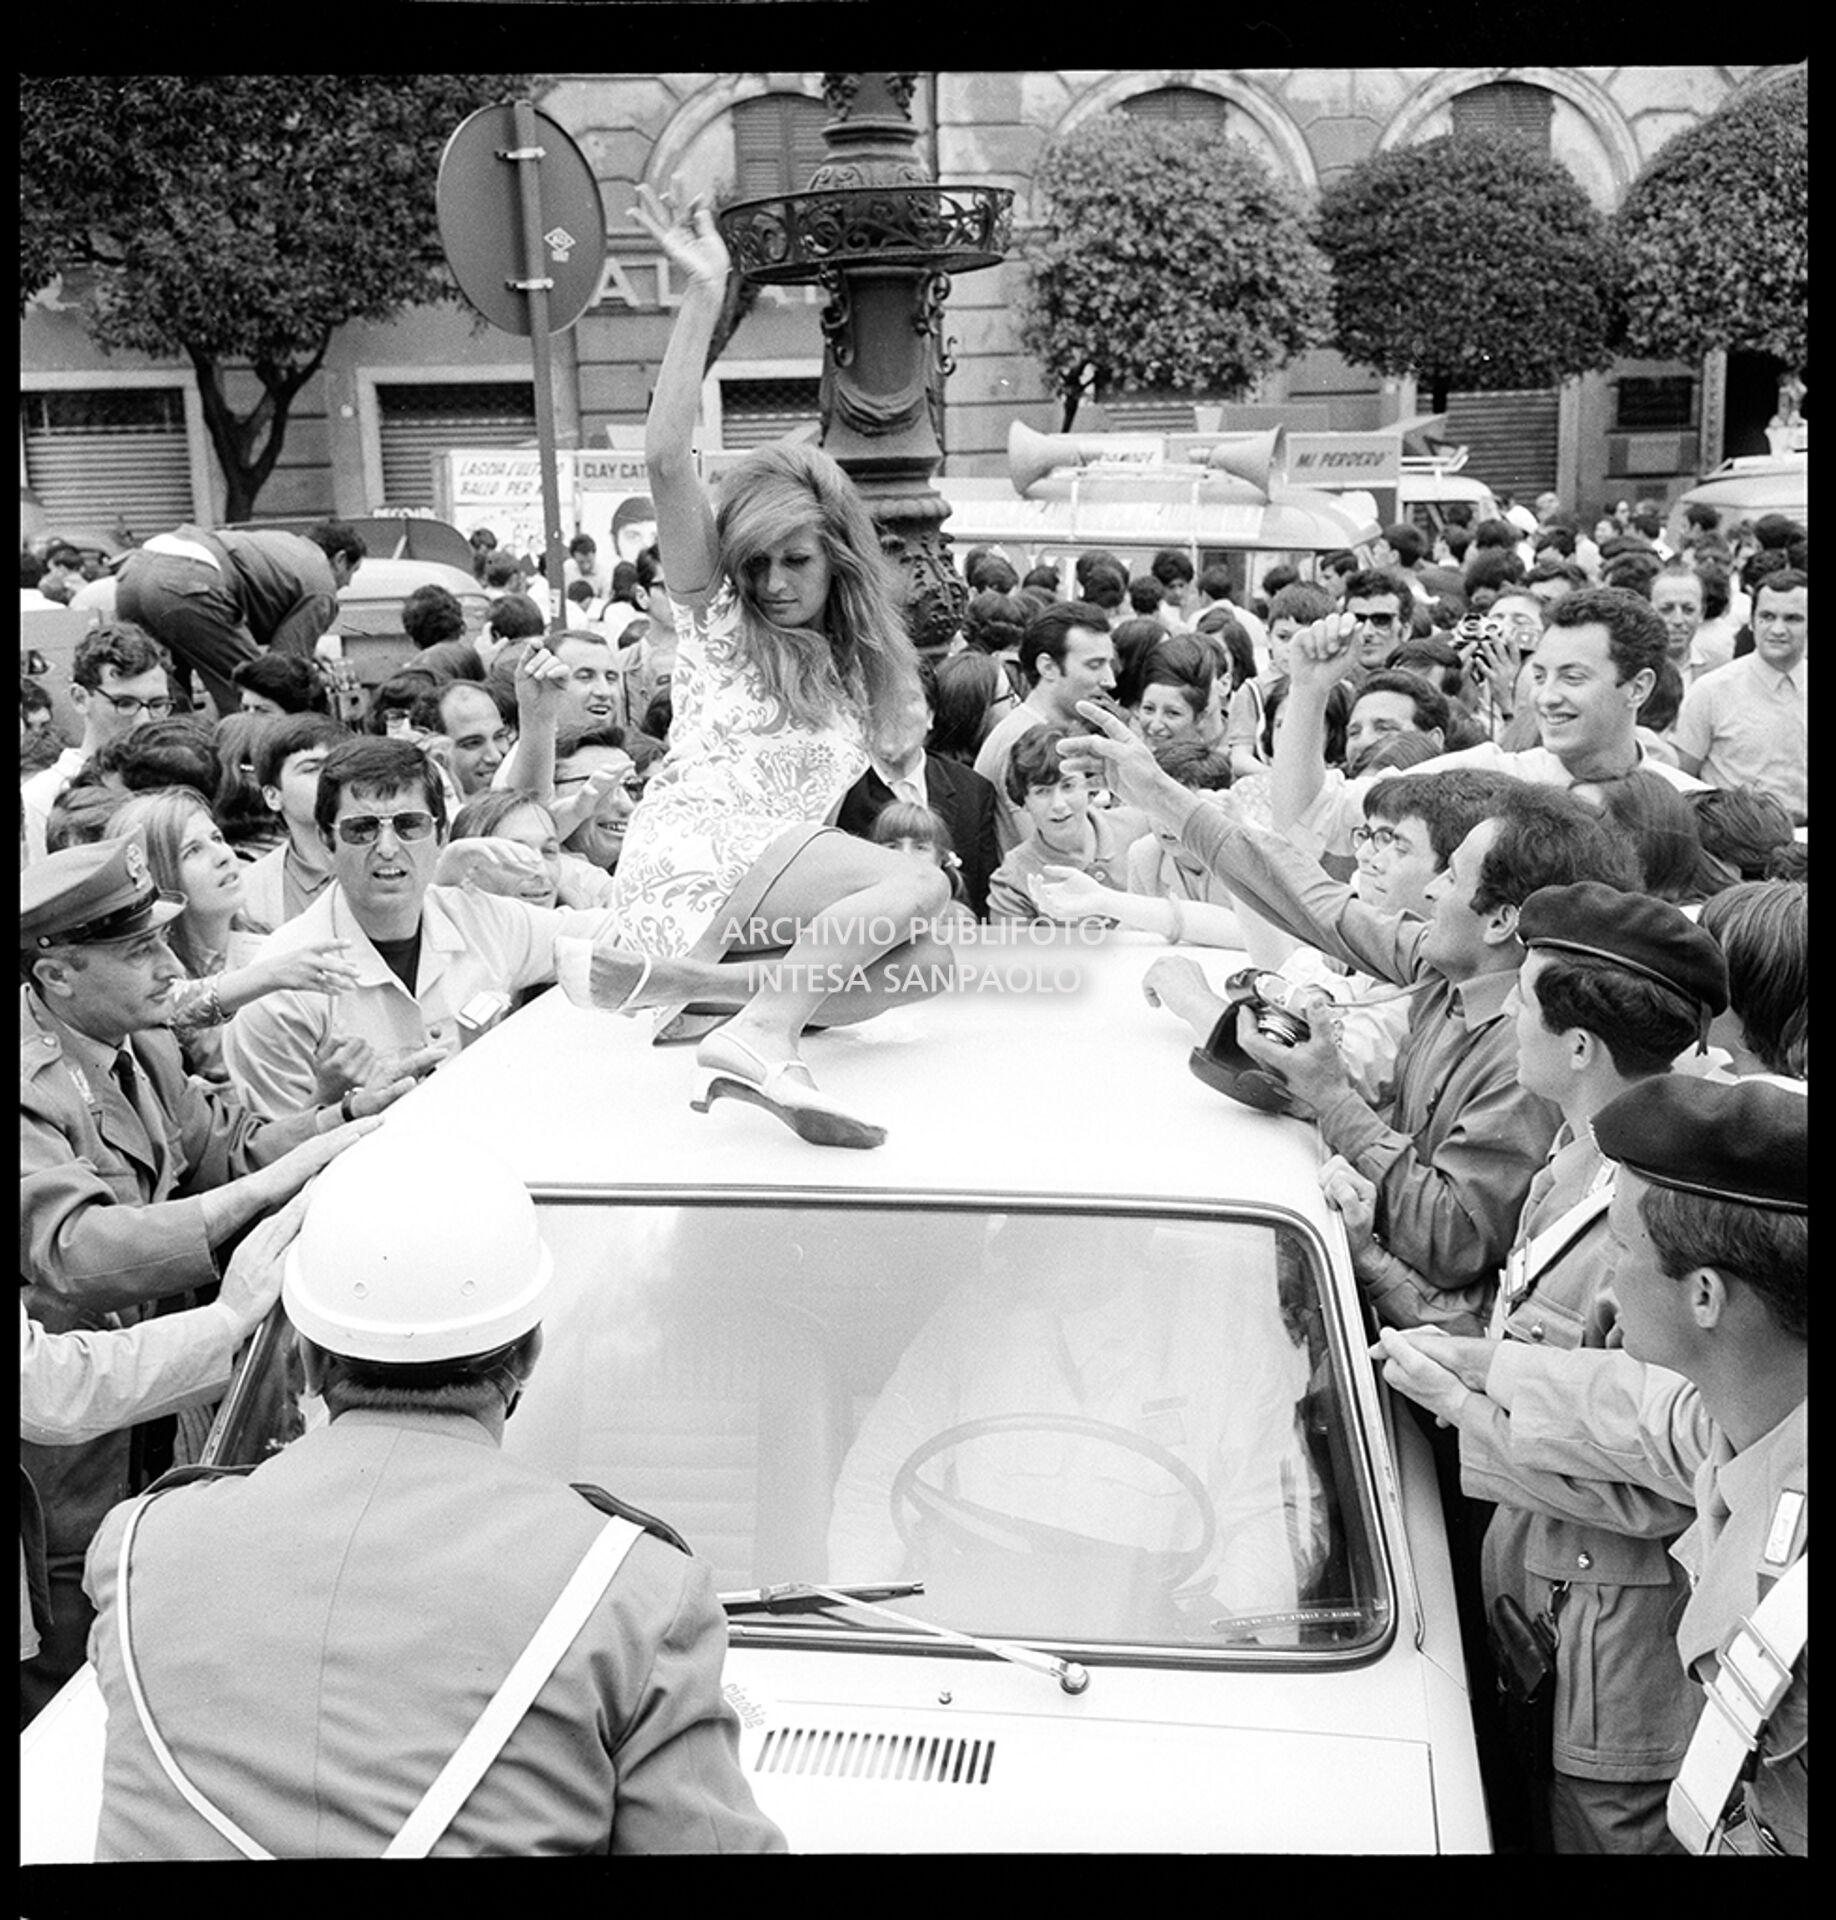 Dalida on the roof of a car, surrounded by fans during one stop of the 7° Cantagiro